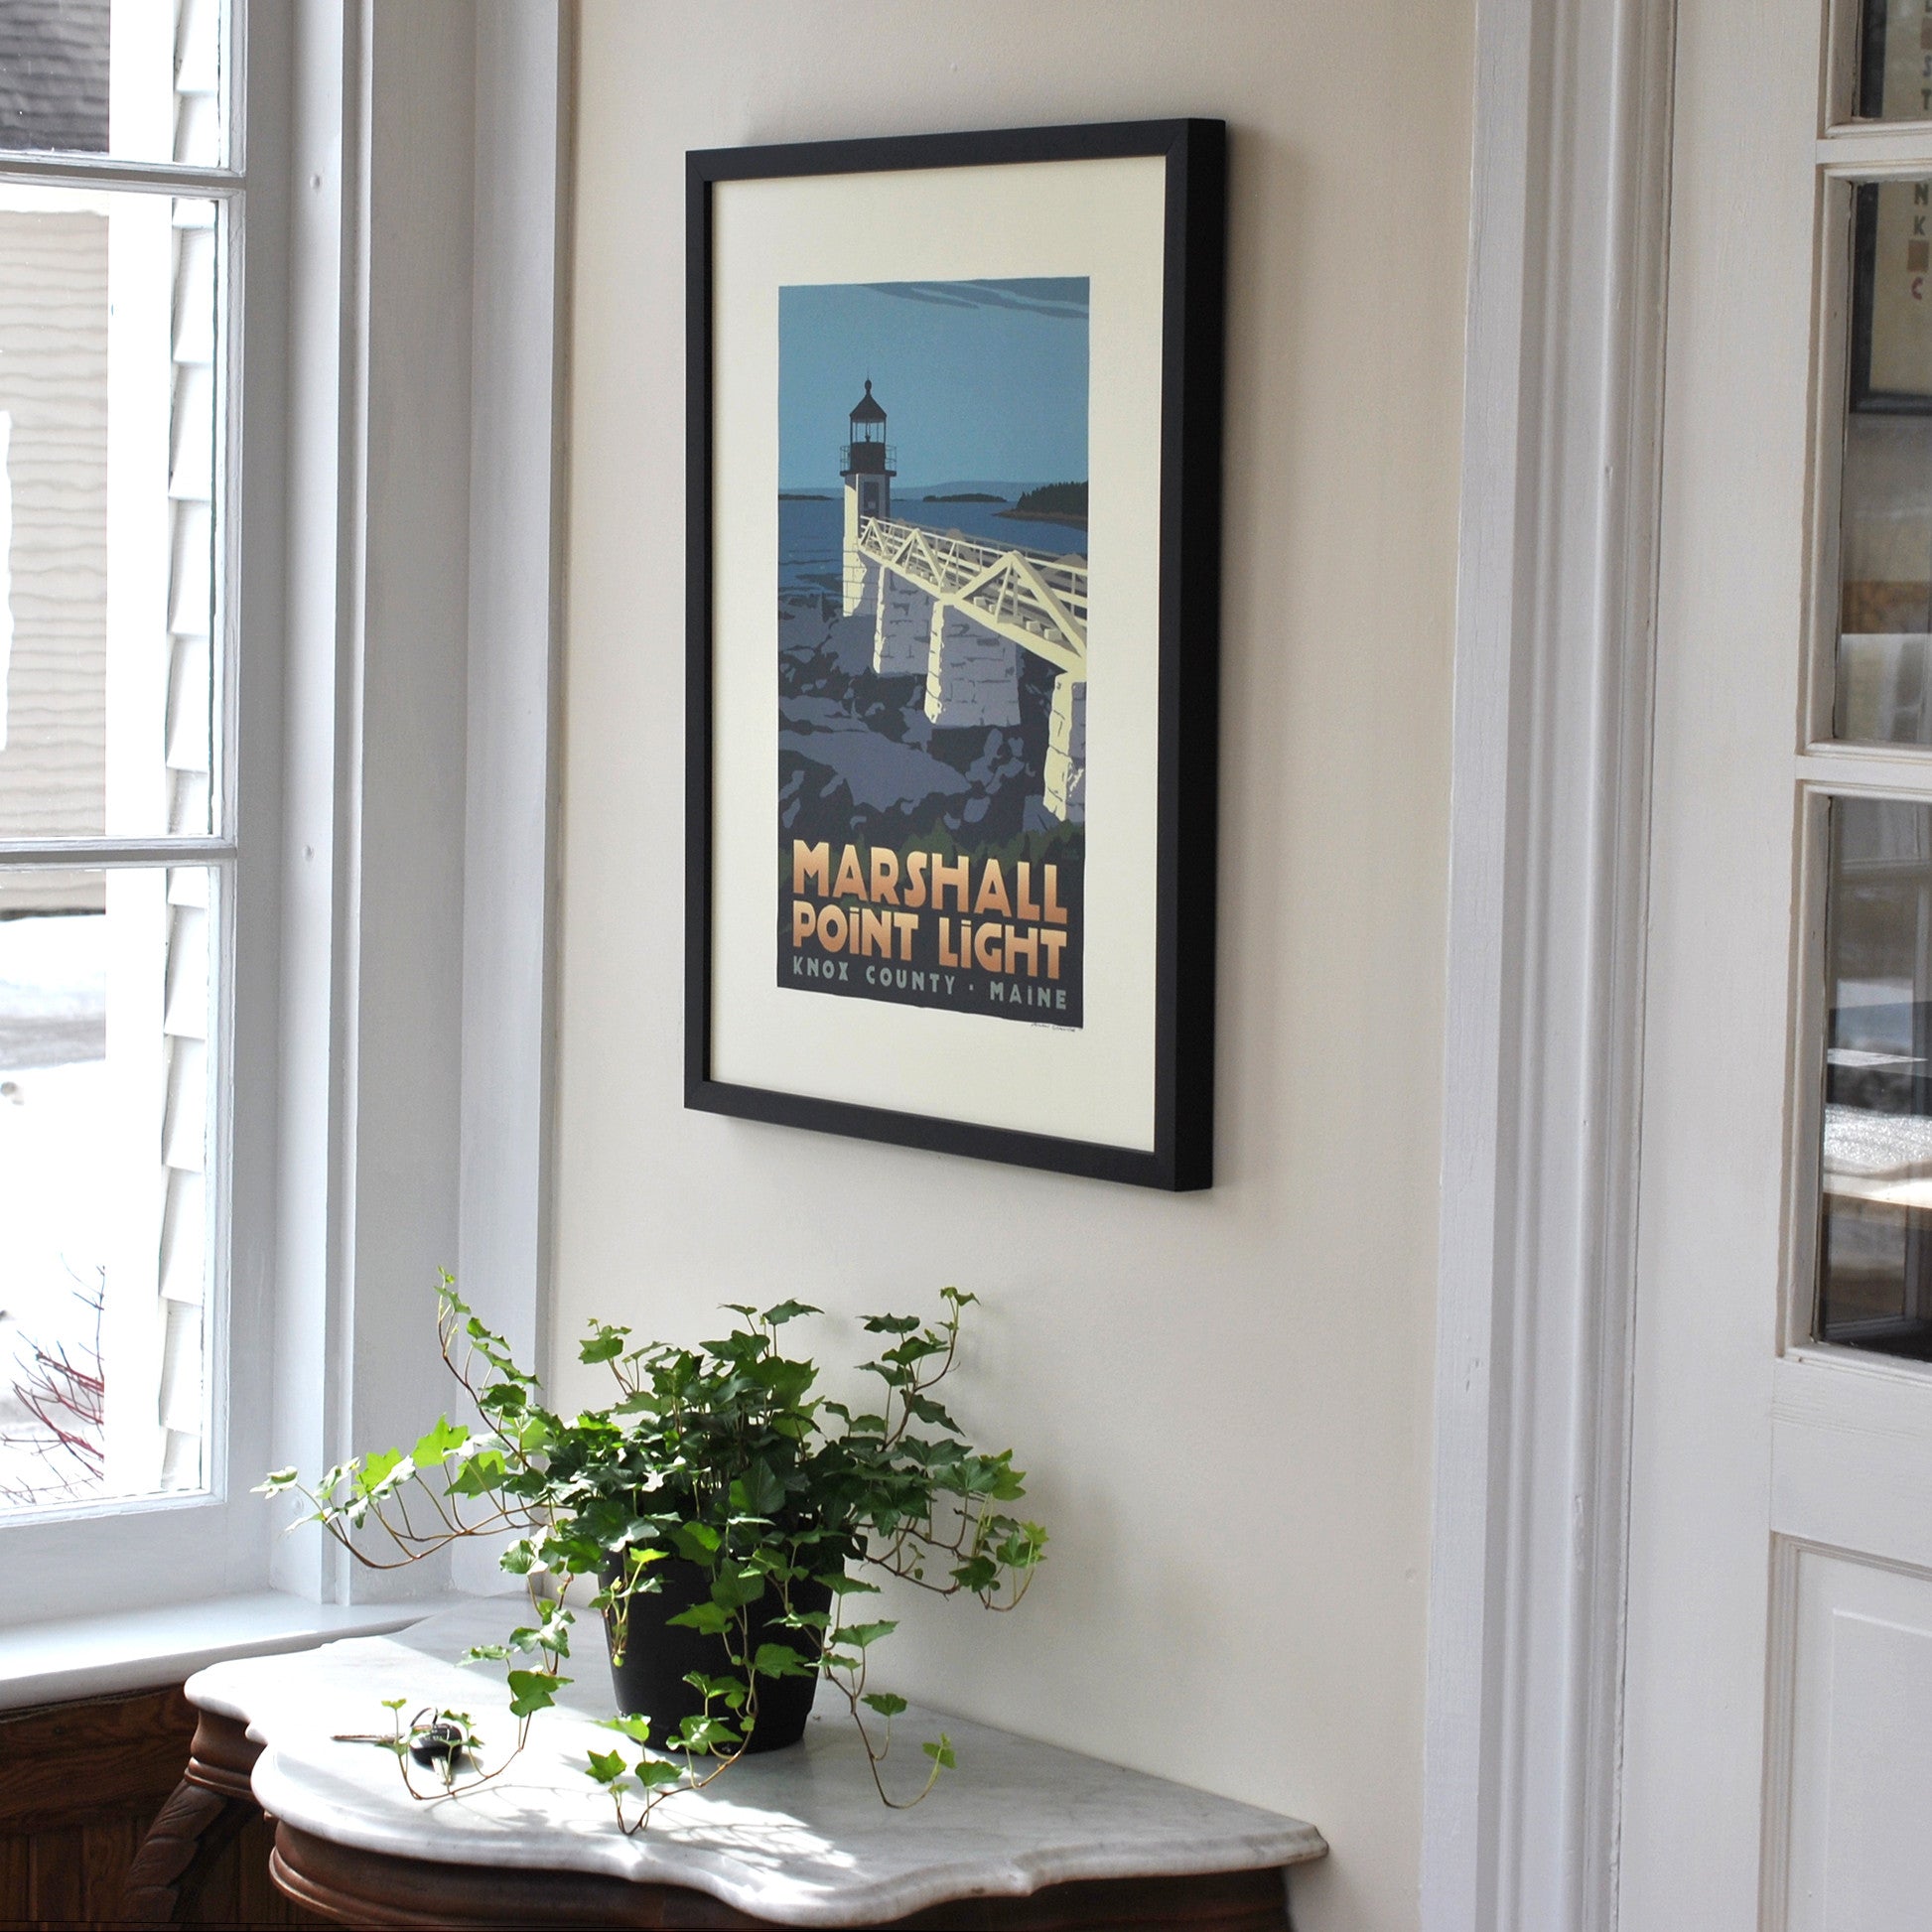 Marshall Point Light Art Print 18" x 24" Framed Travel Poster By Alan Claude - Maine